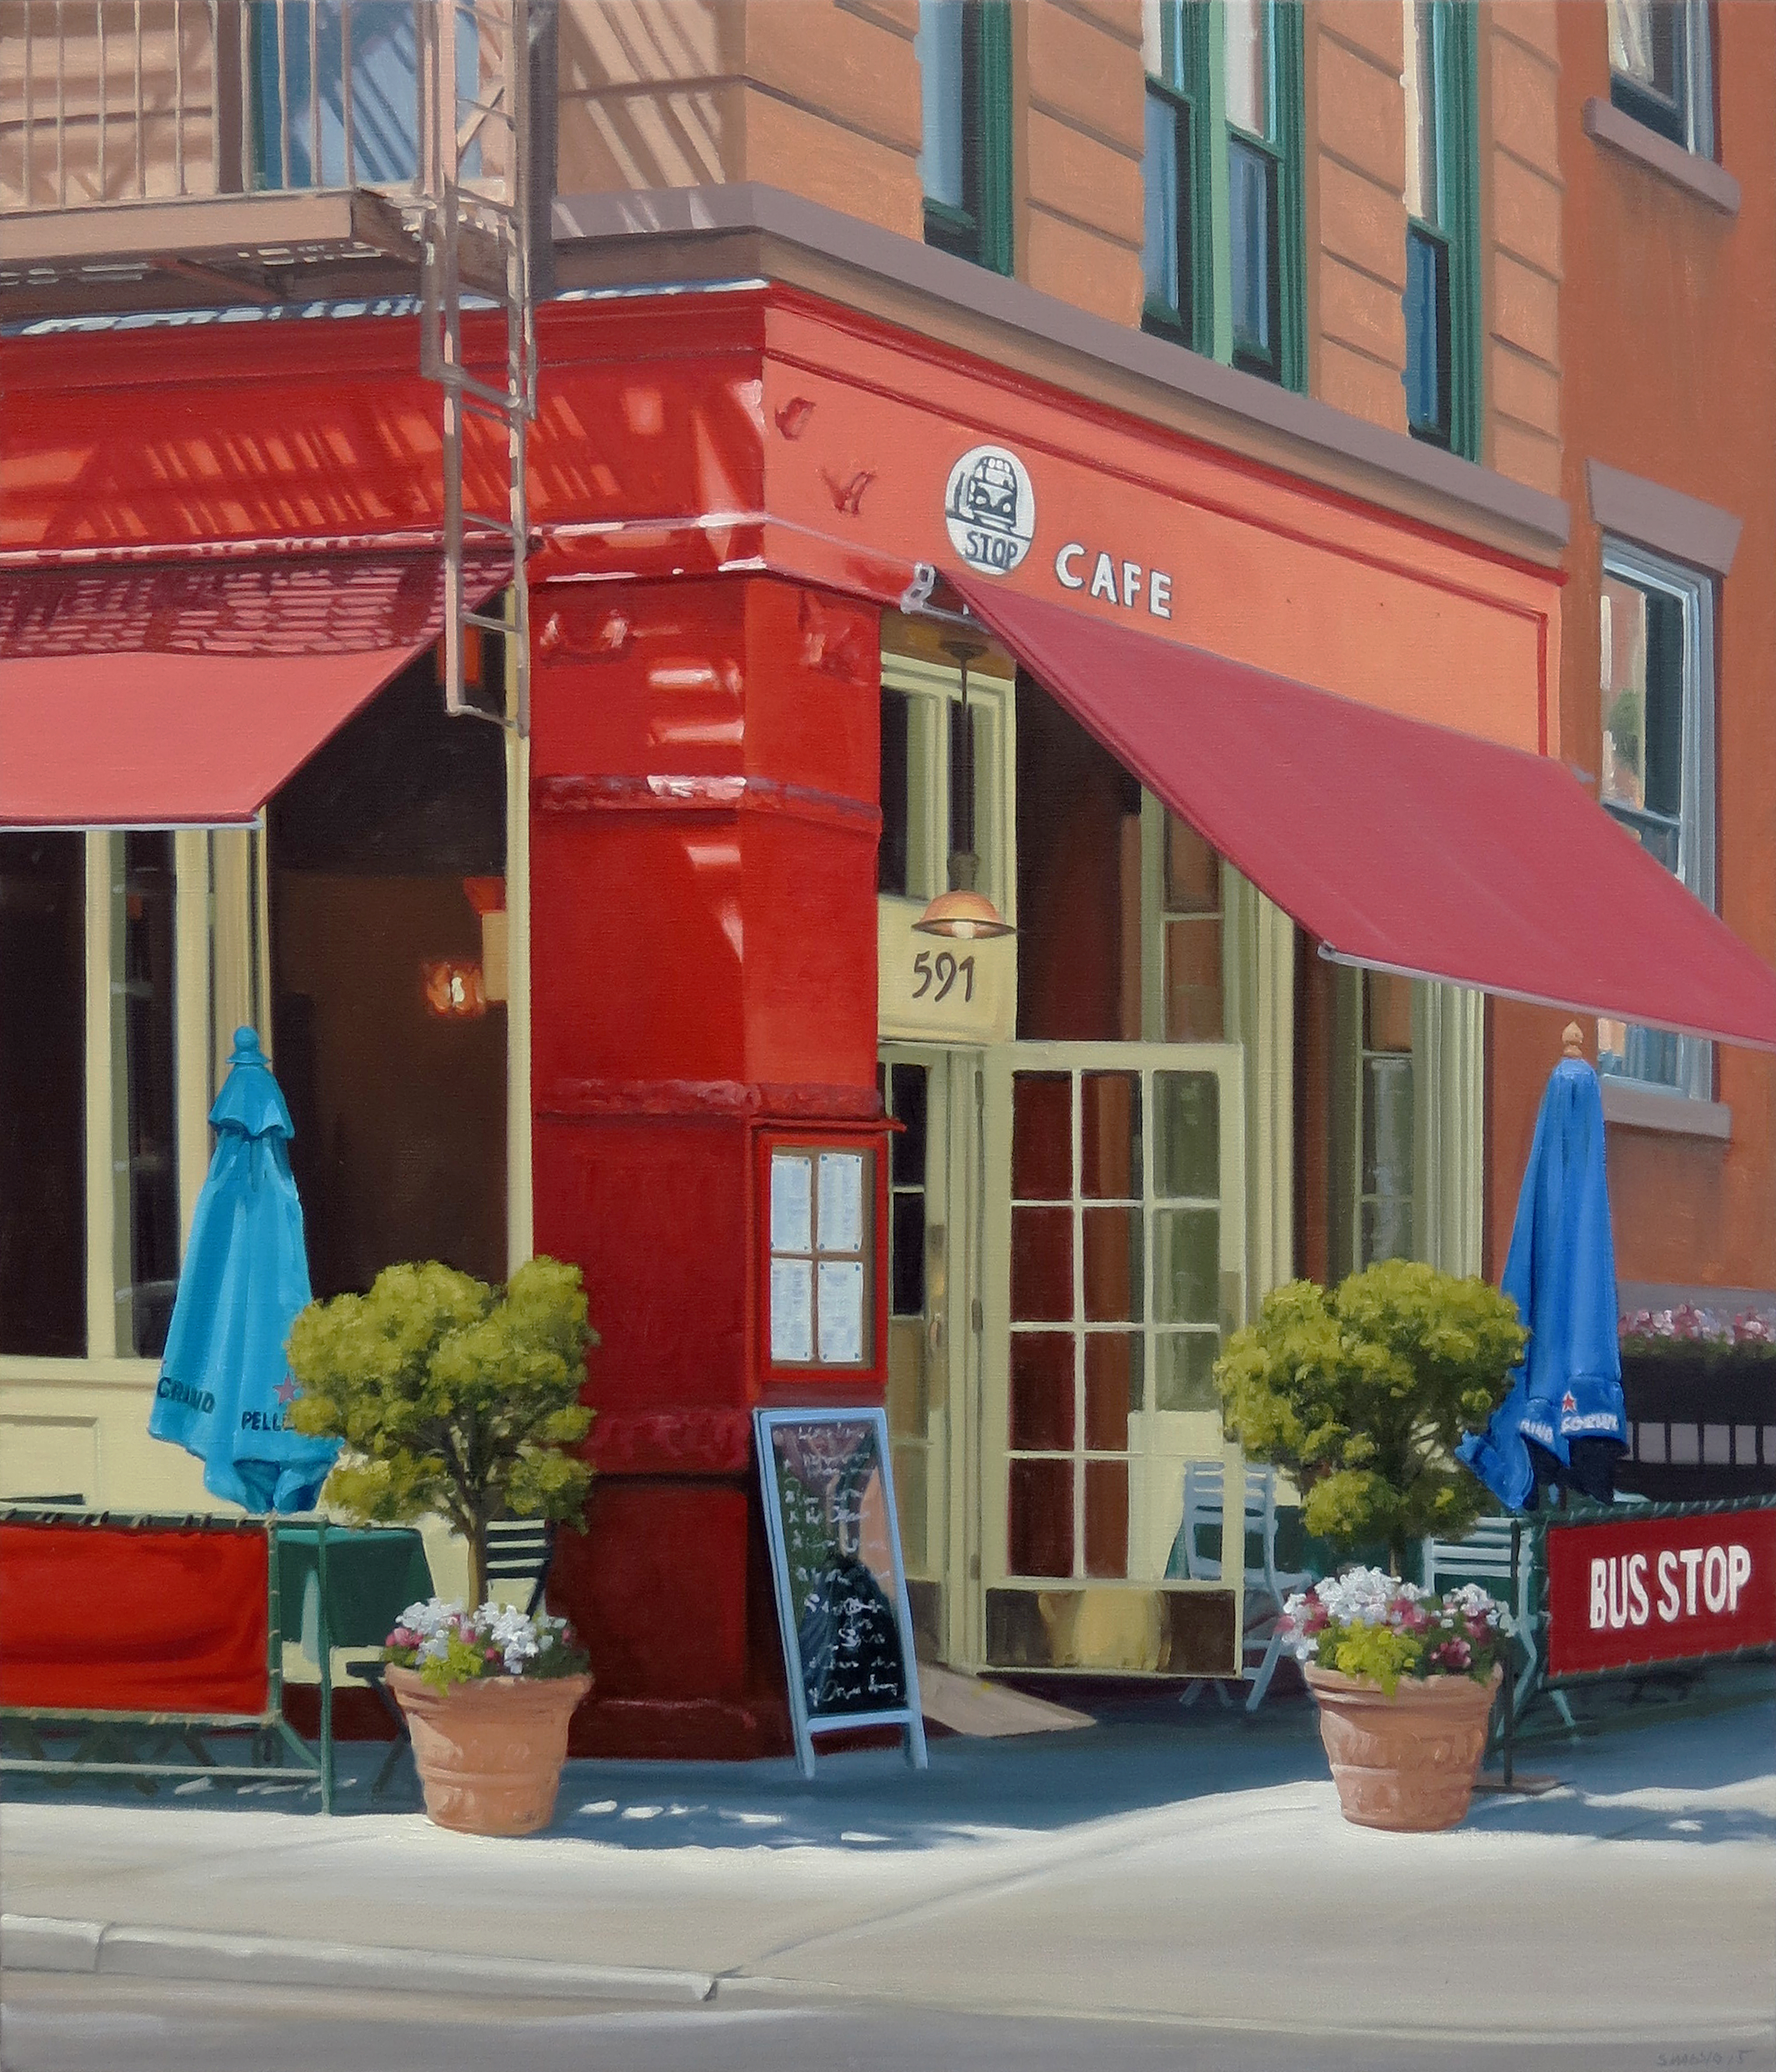 Stephen Magsig "Bus Stop Cafe", 42 x 36